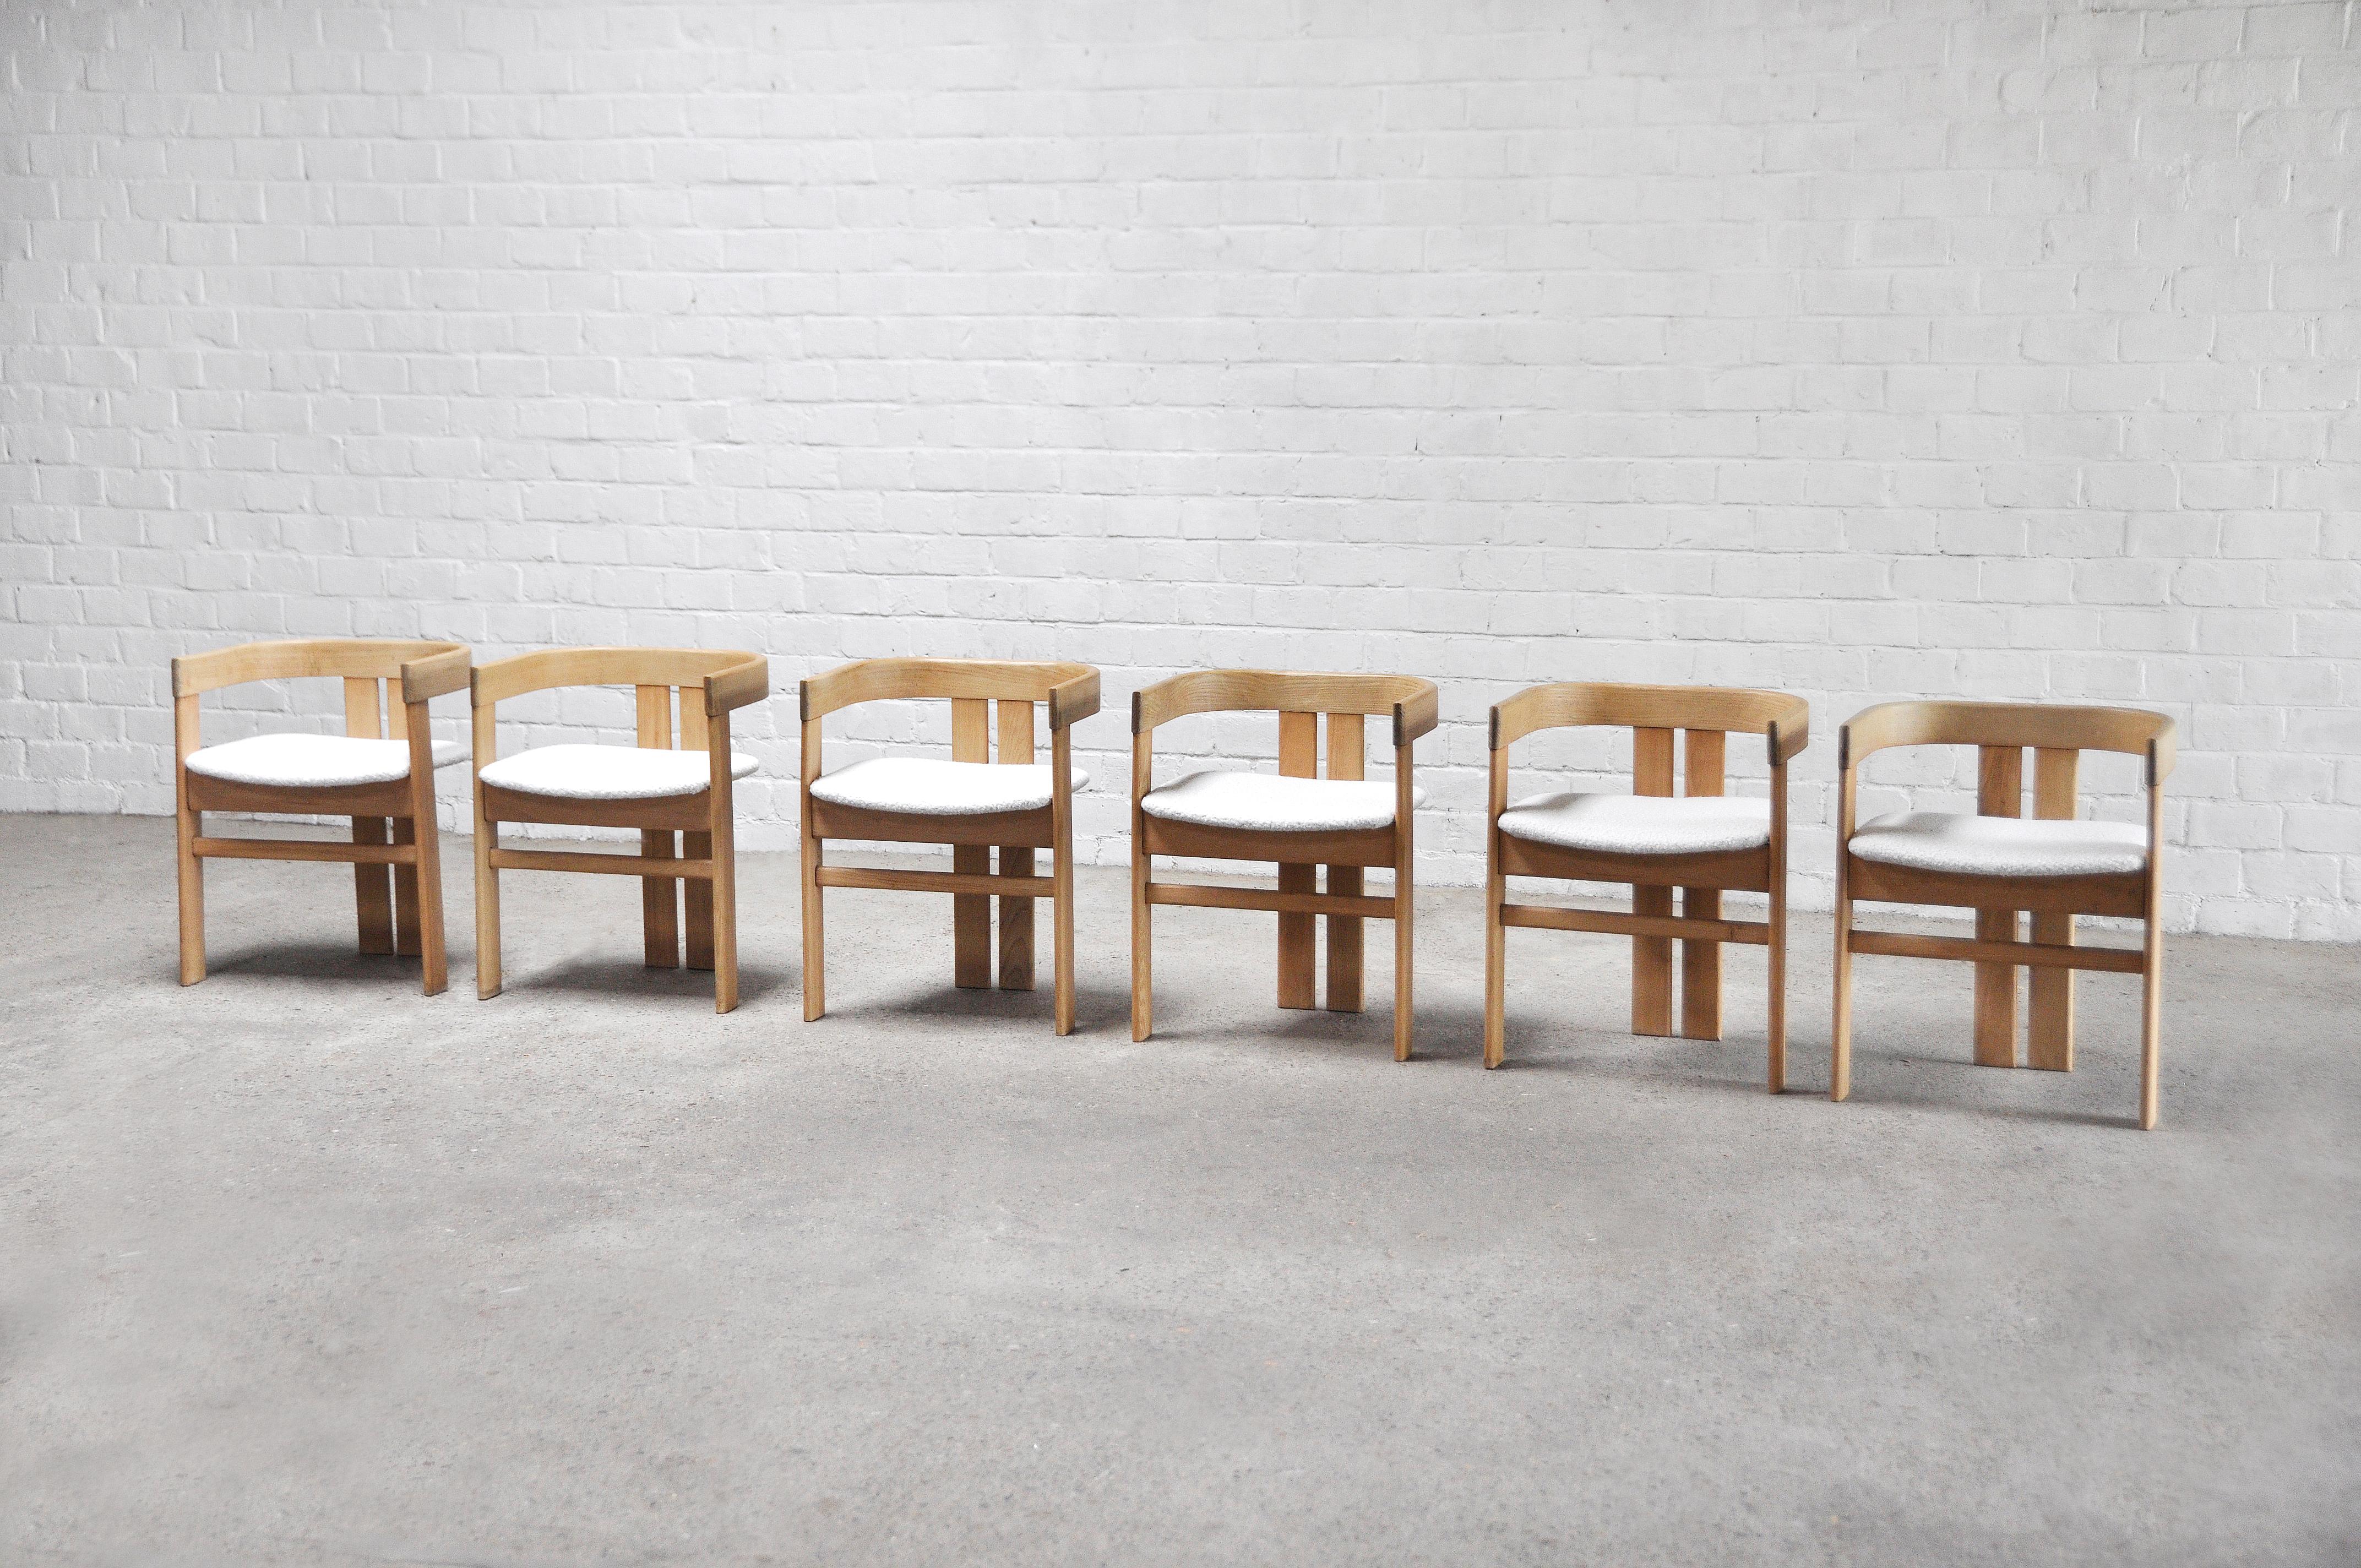 A set of six “Pigreco” style dining chairs in beech wood and bouclé wool, Italy, 1960-1970’s,
These chairs have an iconic and elegant design that is very similar to that of Tobia Scarpa, yet the designs are different in their details. They feature a